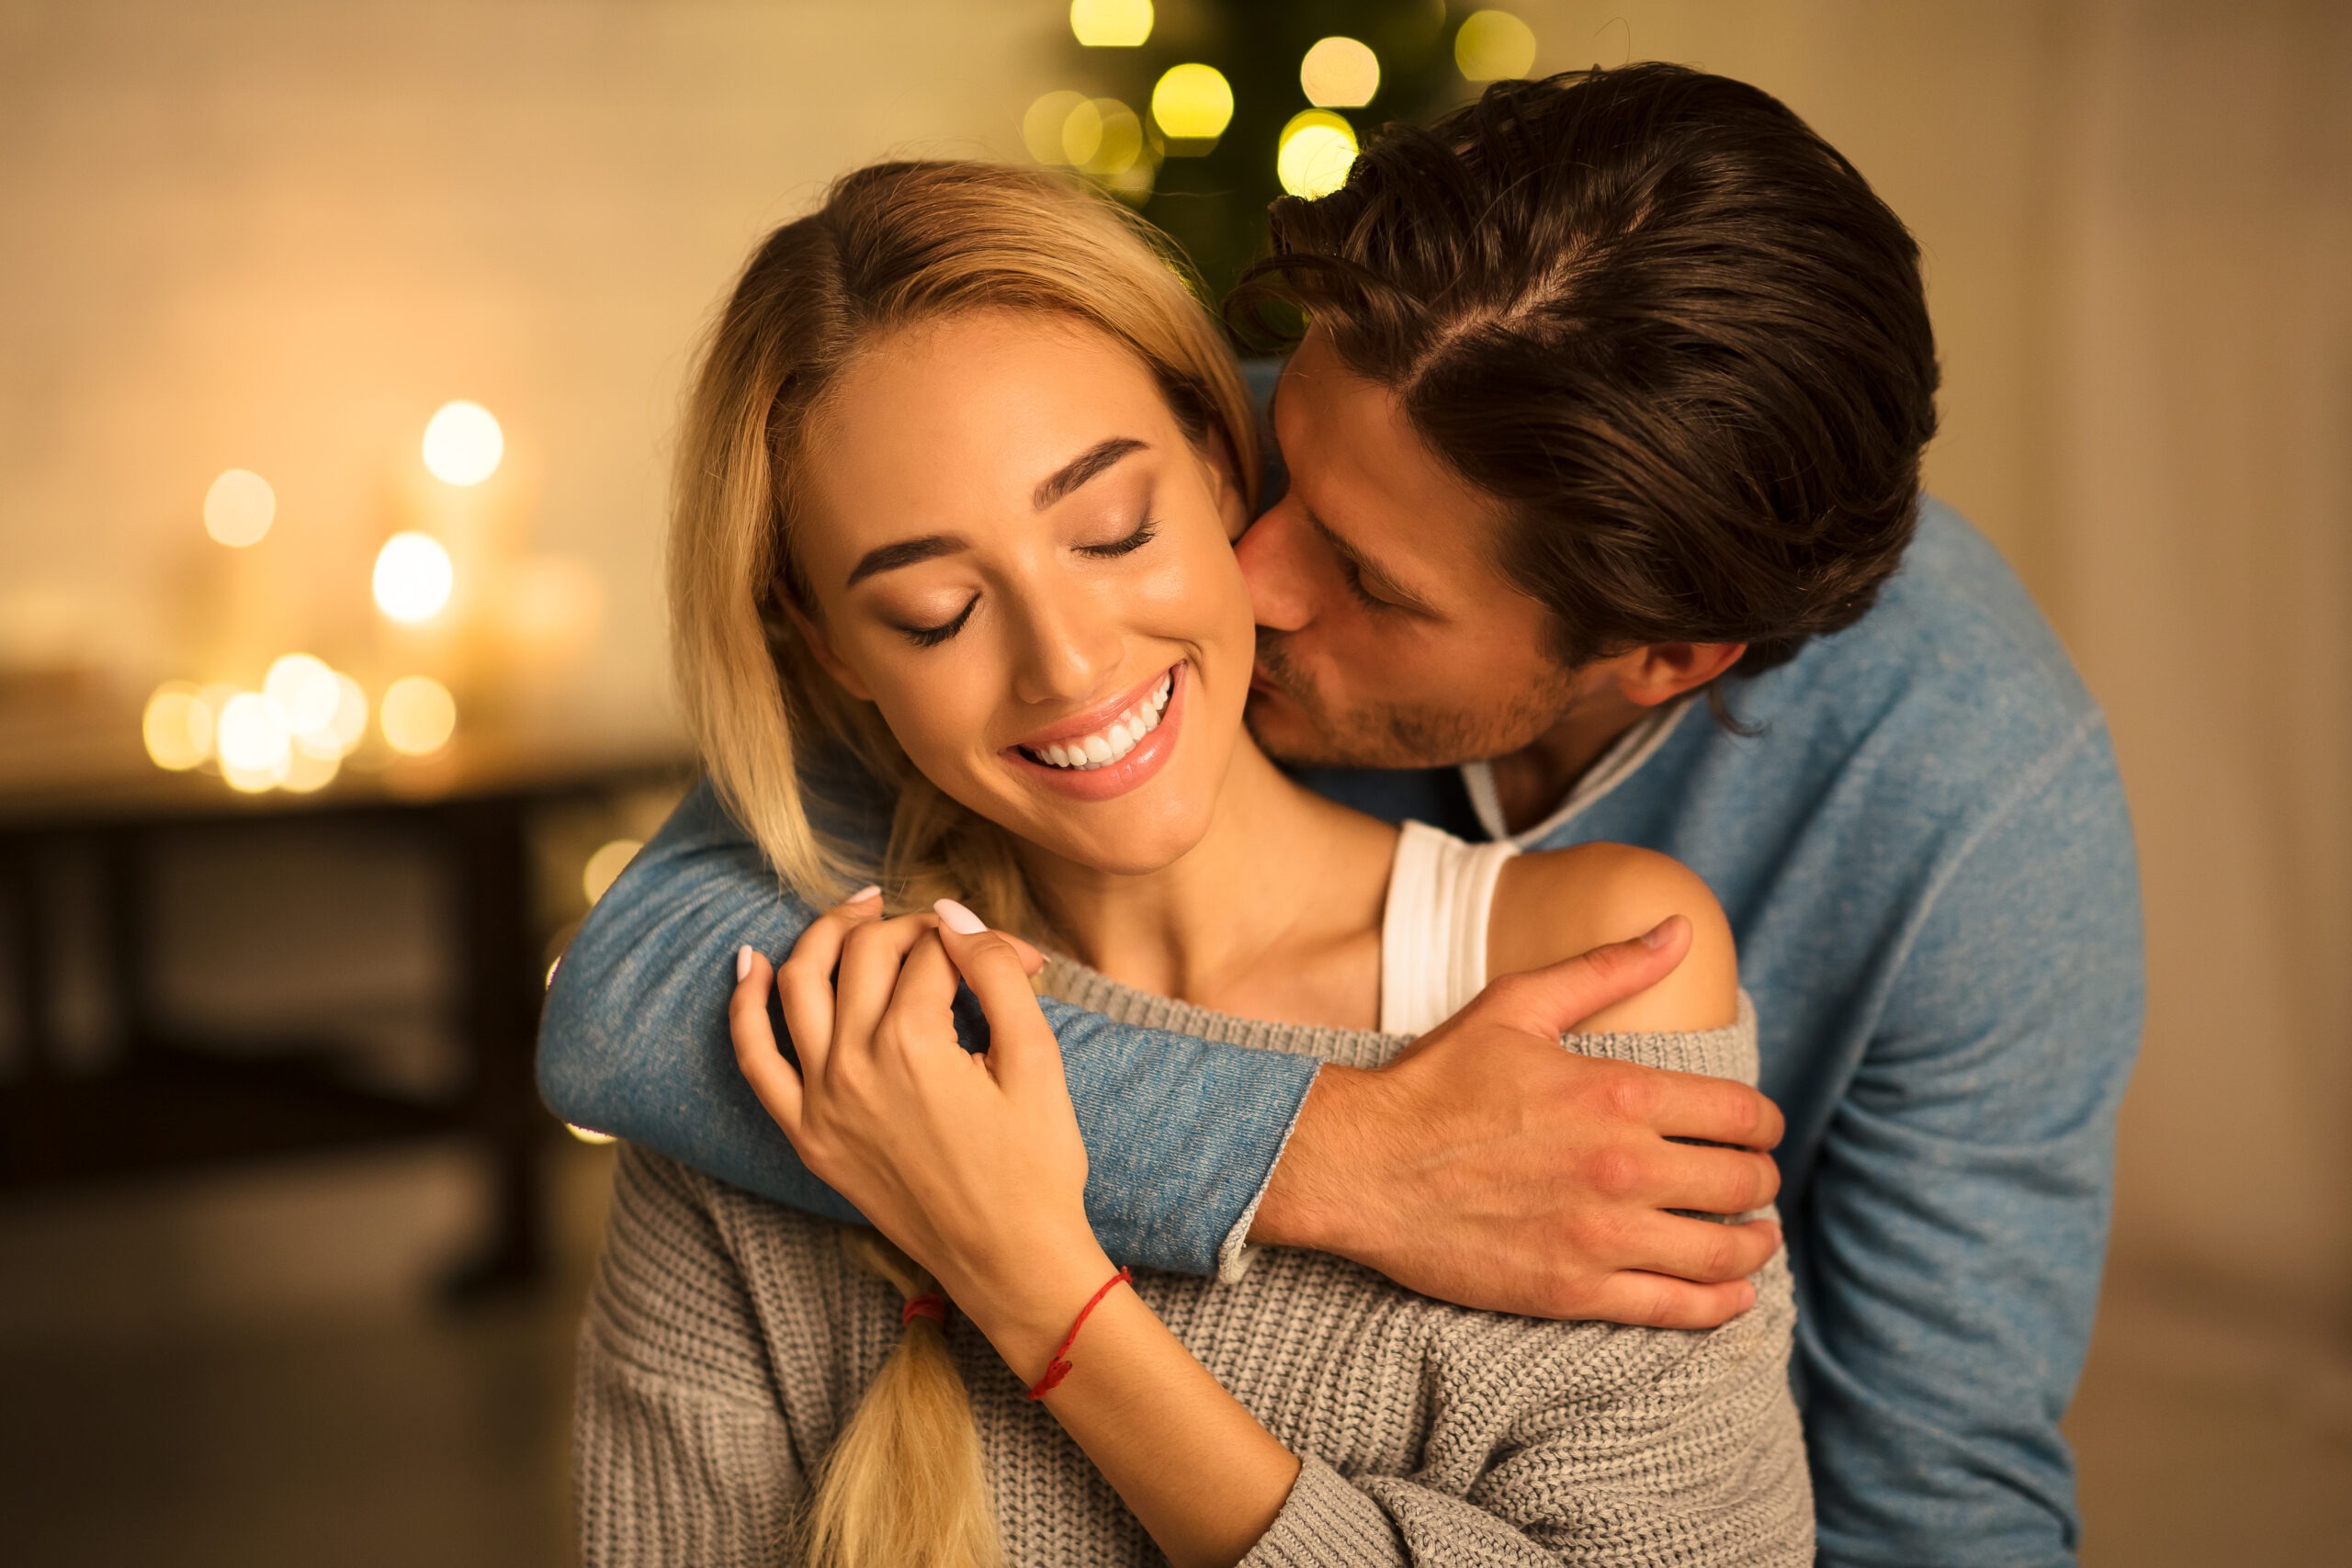 Tender moment Man-kissing wife in front of Christmas tree